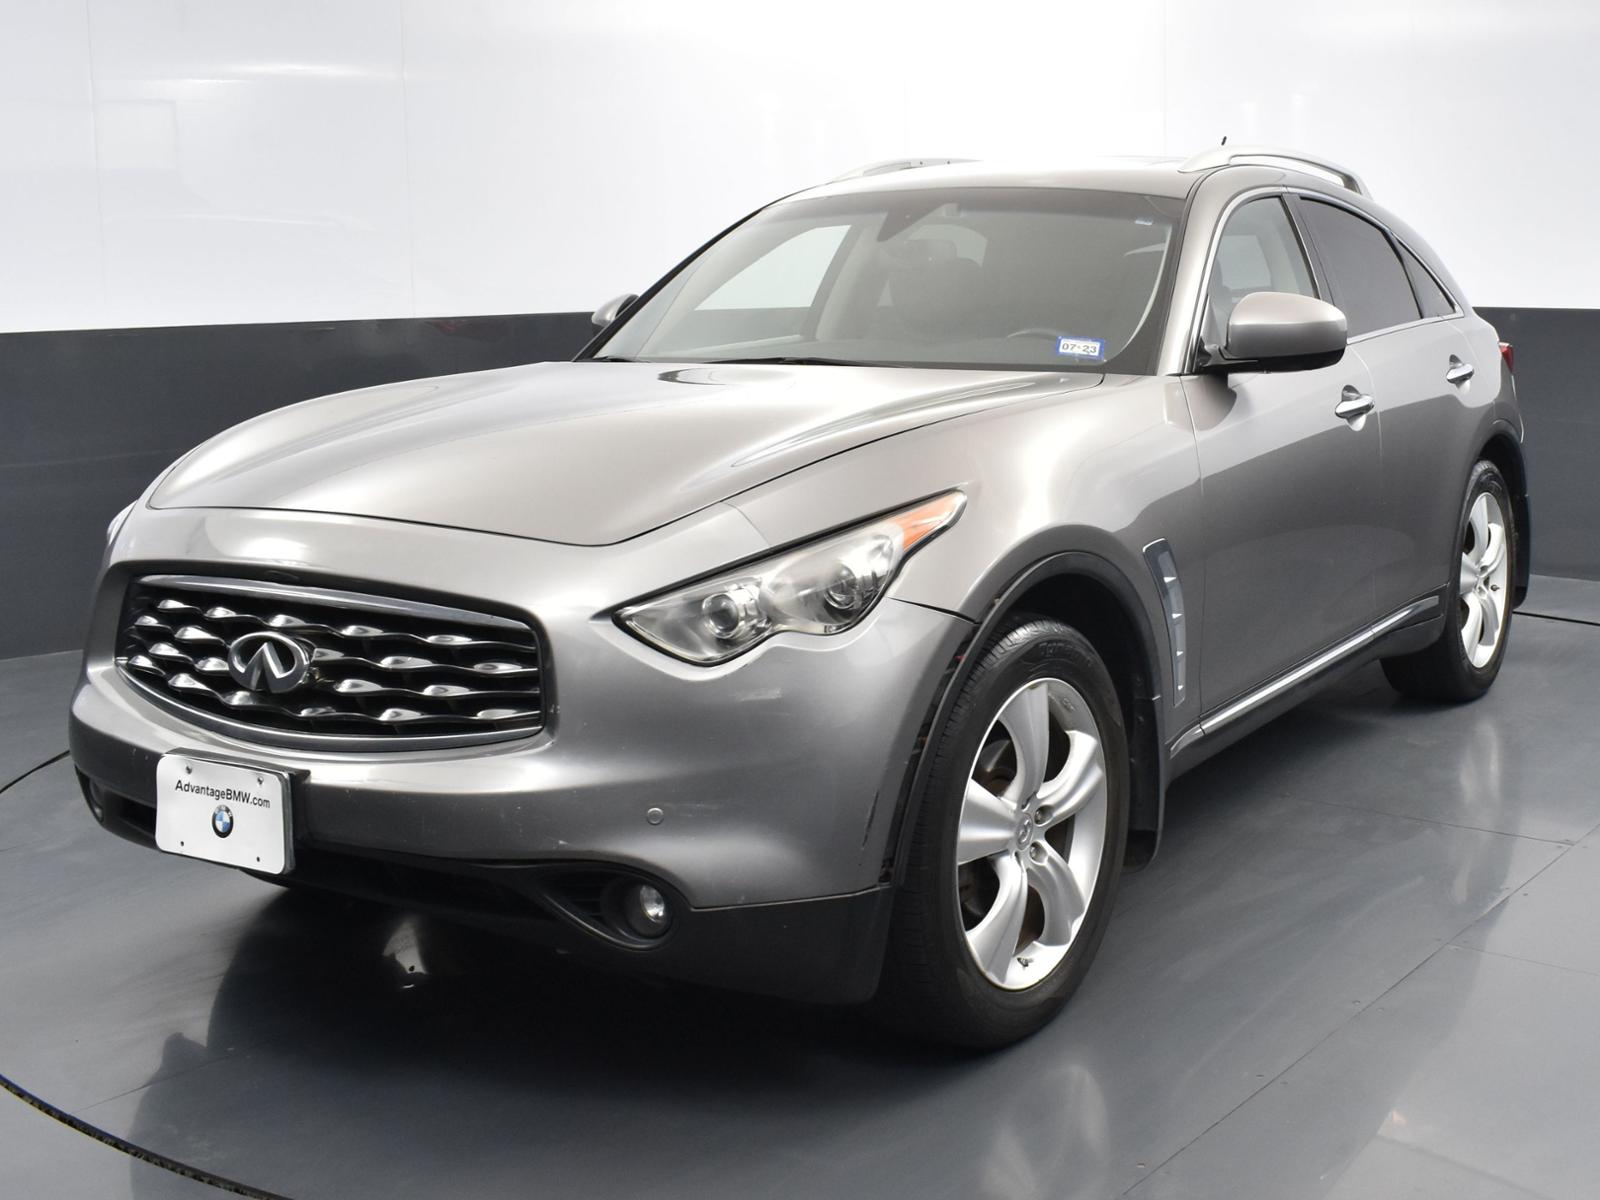 Pre-Owned 2011 INFINITI FX35 RWD 4dr Sport Utility in Houston #BM710700 |  Sterling McCall Lexus